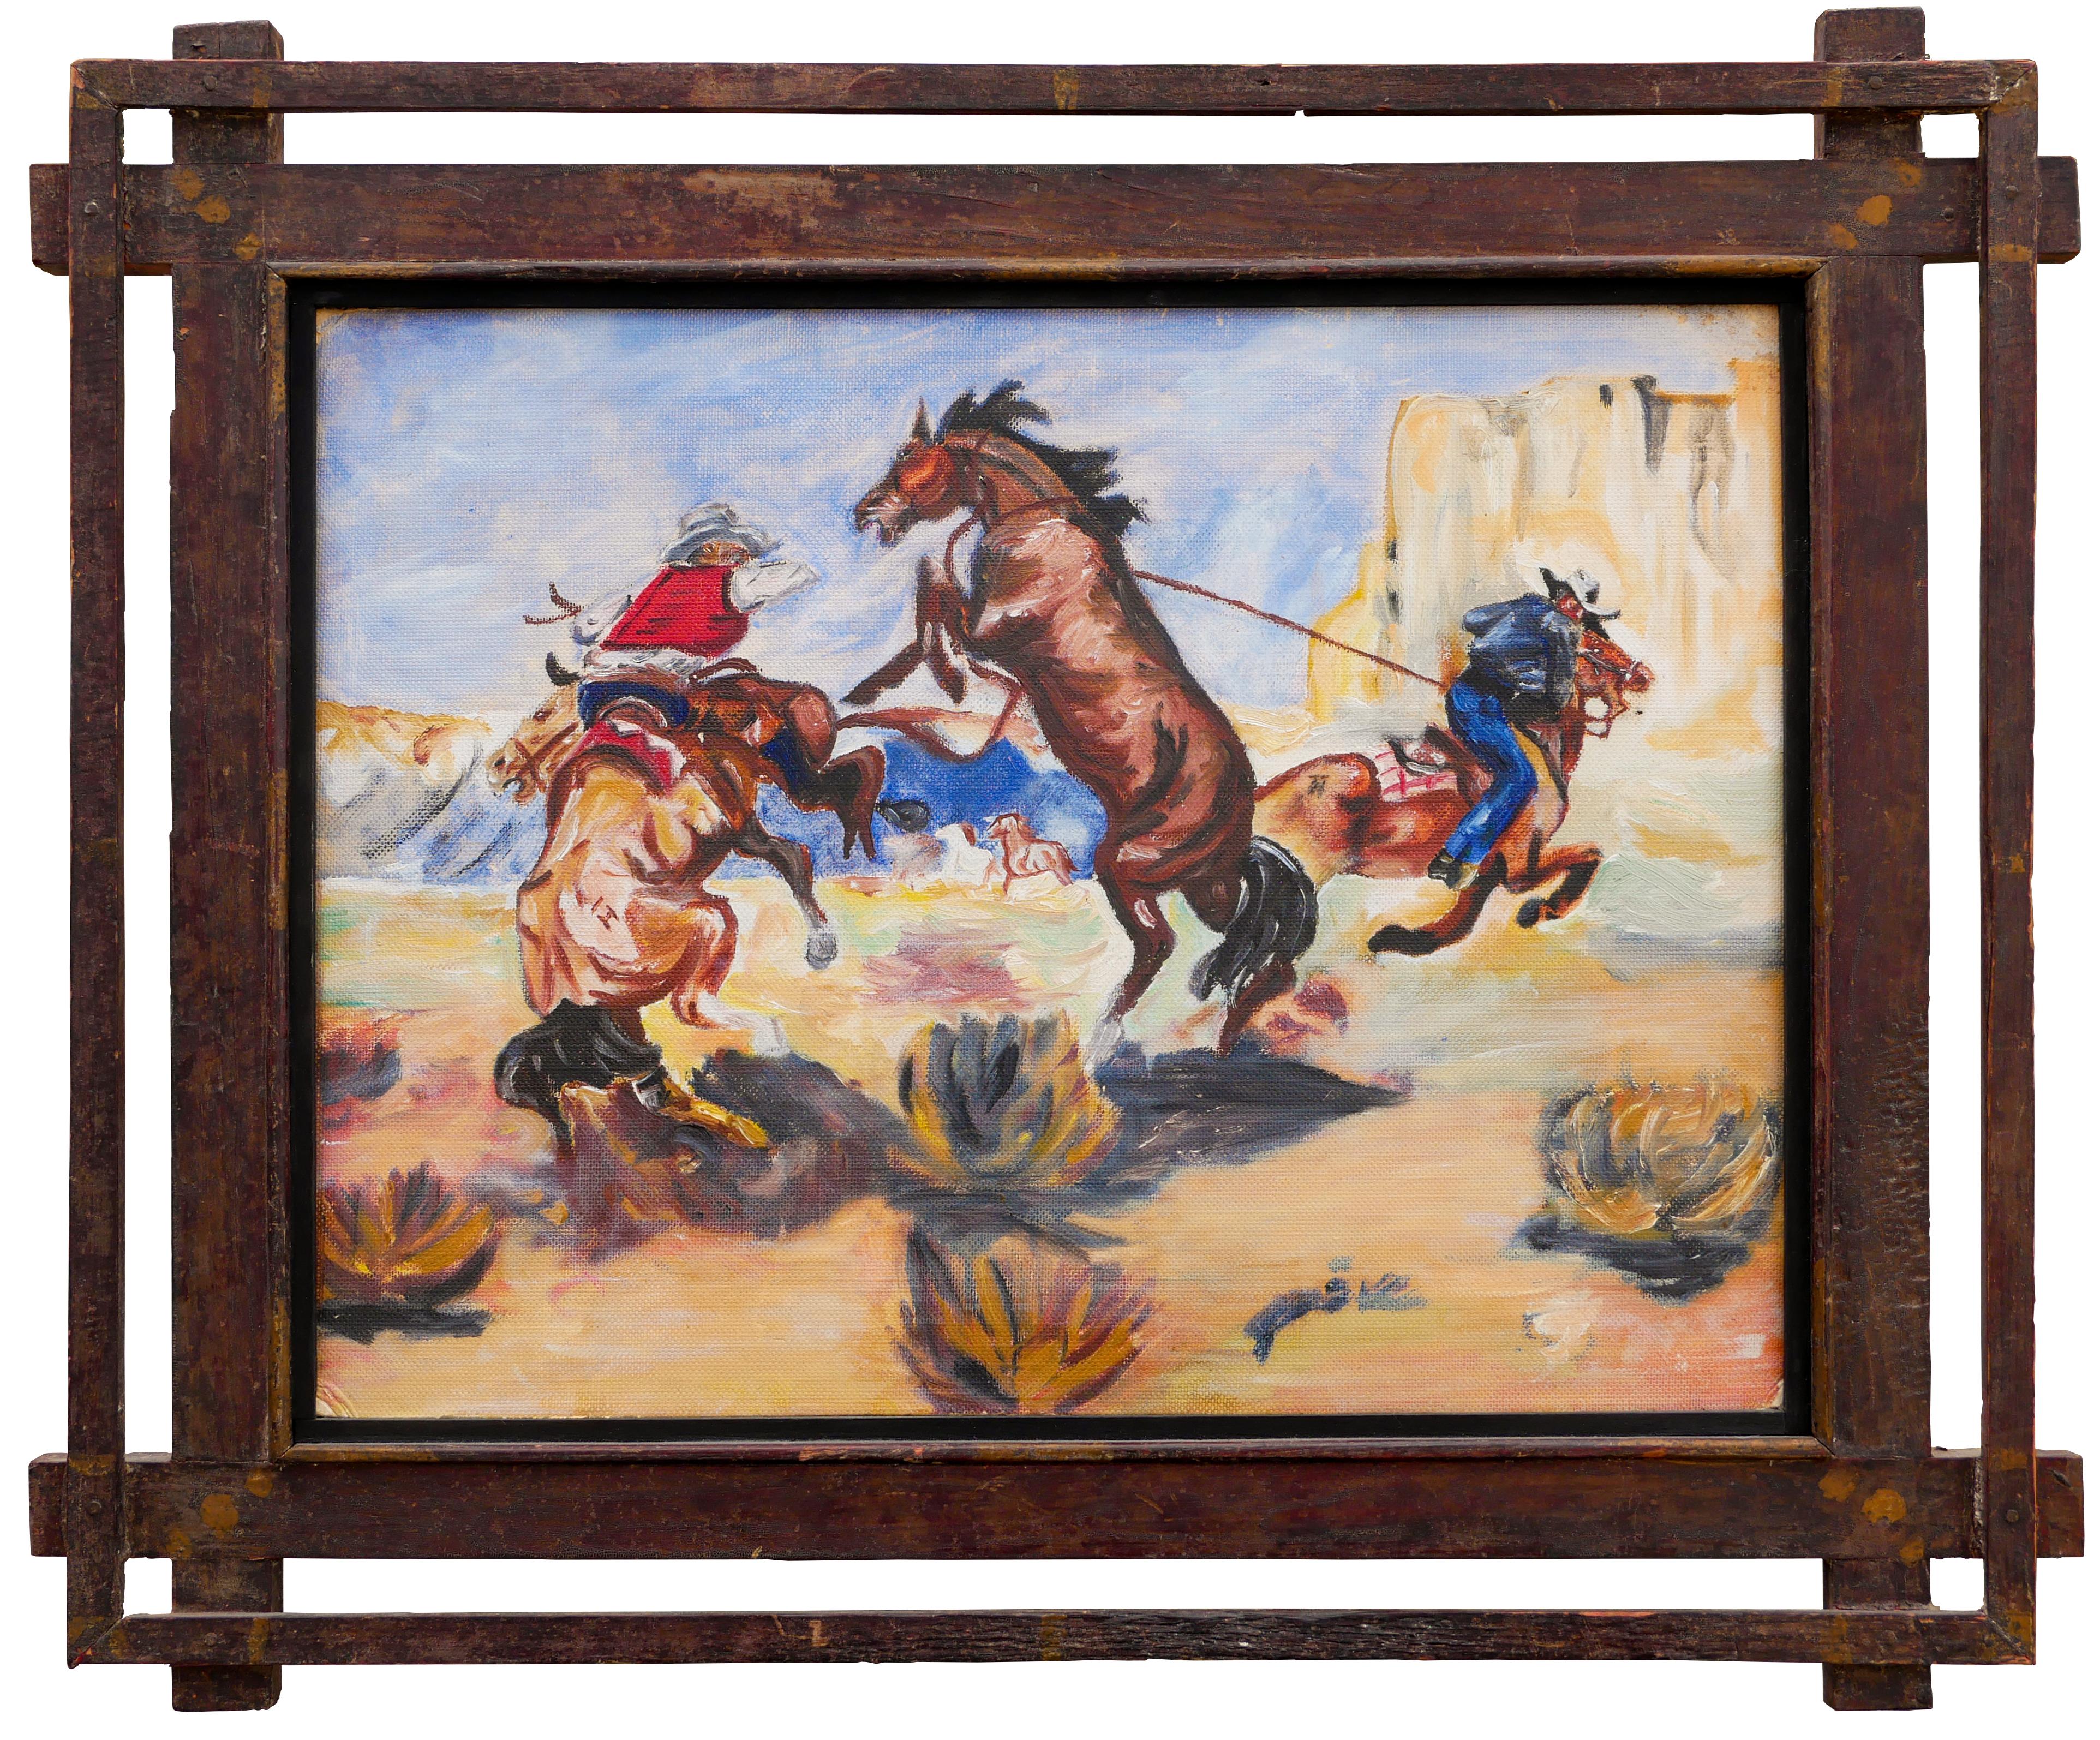 Blue, Yellow, and Brown Abstract Figurative Horse Chase Western Landscape 